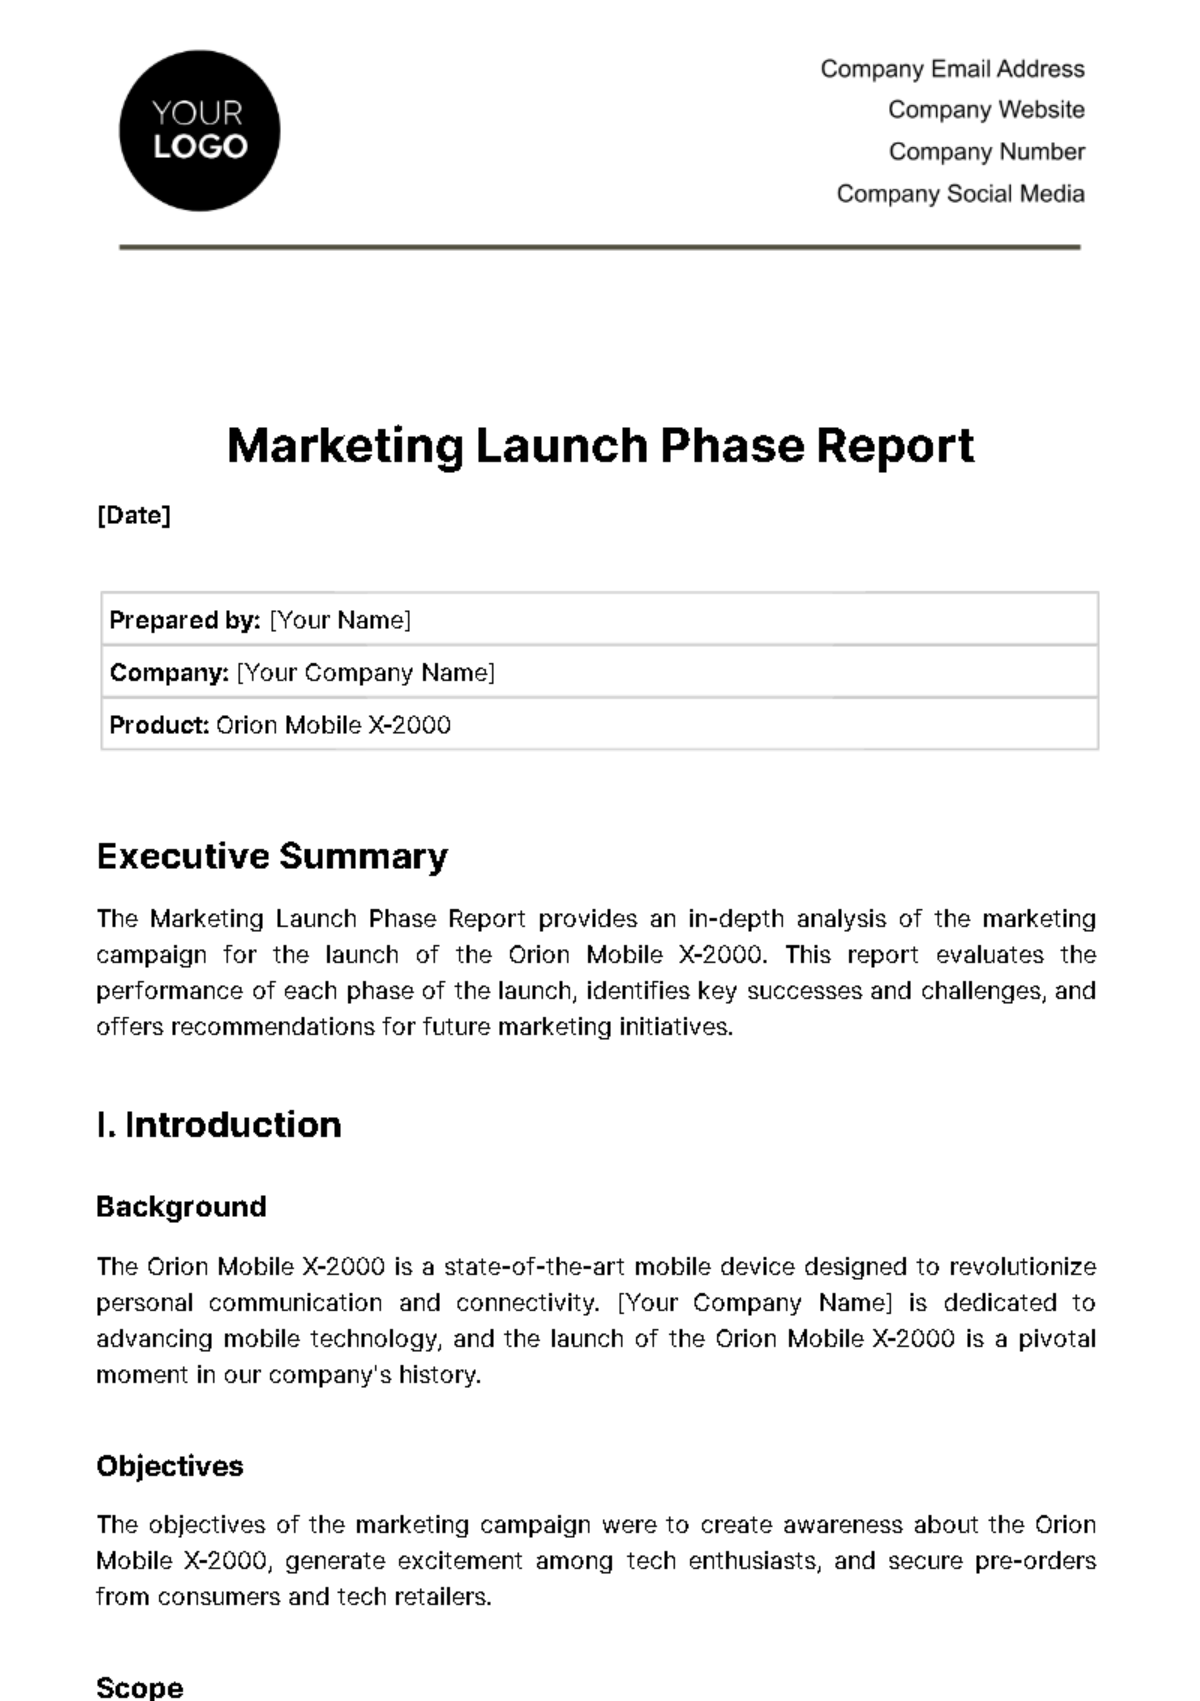 Free Marketing Launch Phase Report Template